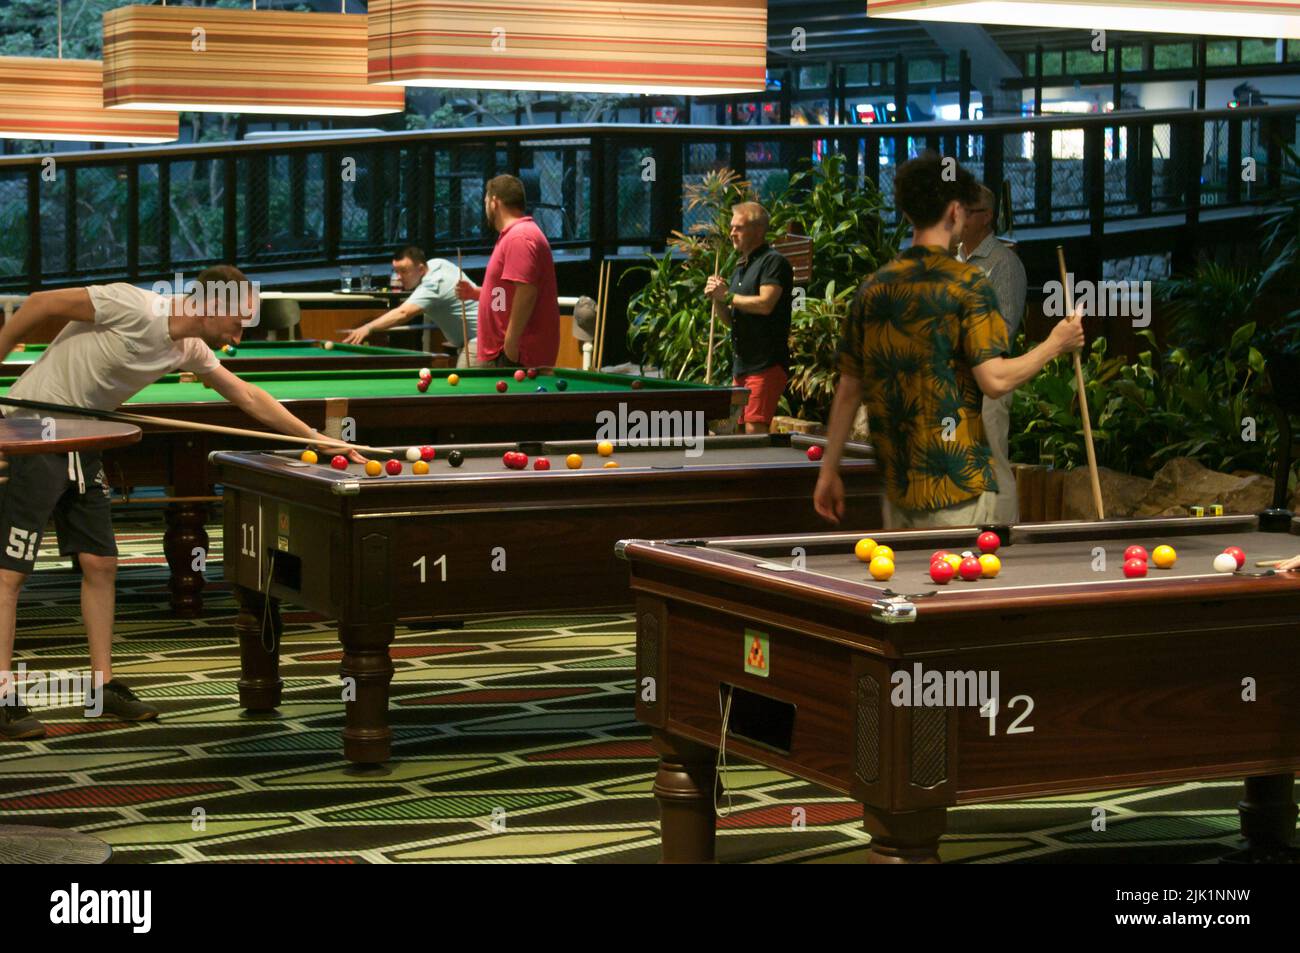 People Playing Pool Inside a Pool Hall Centre Parcs Longleat UK Stock Photo